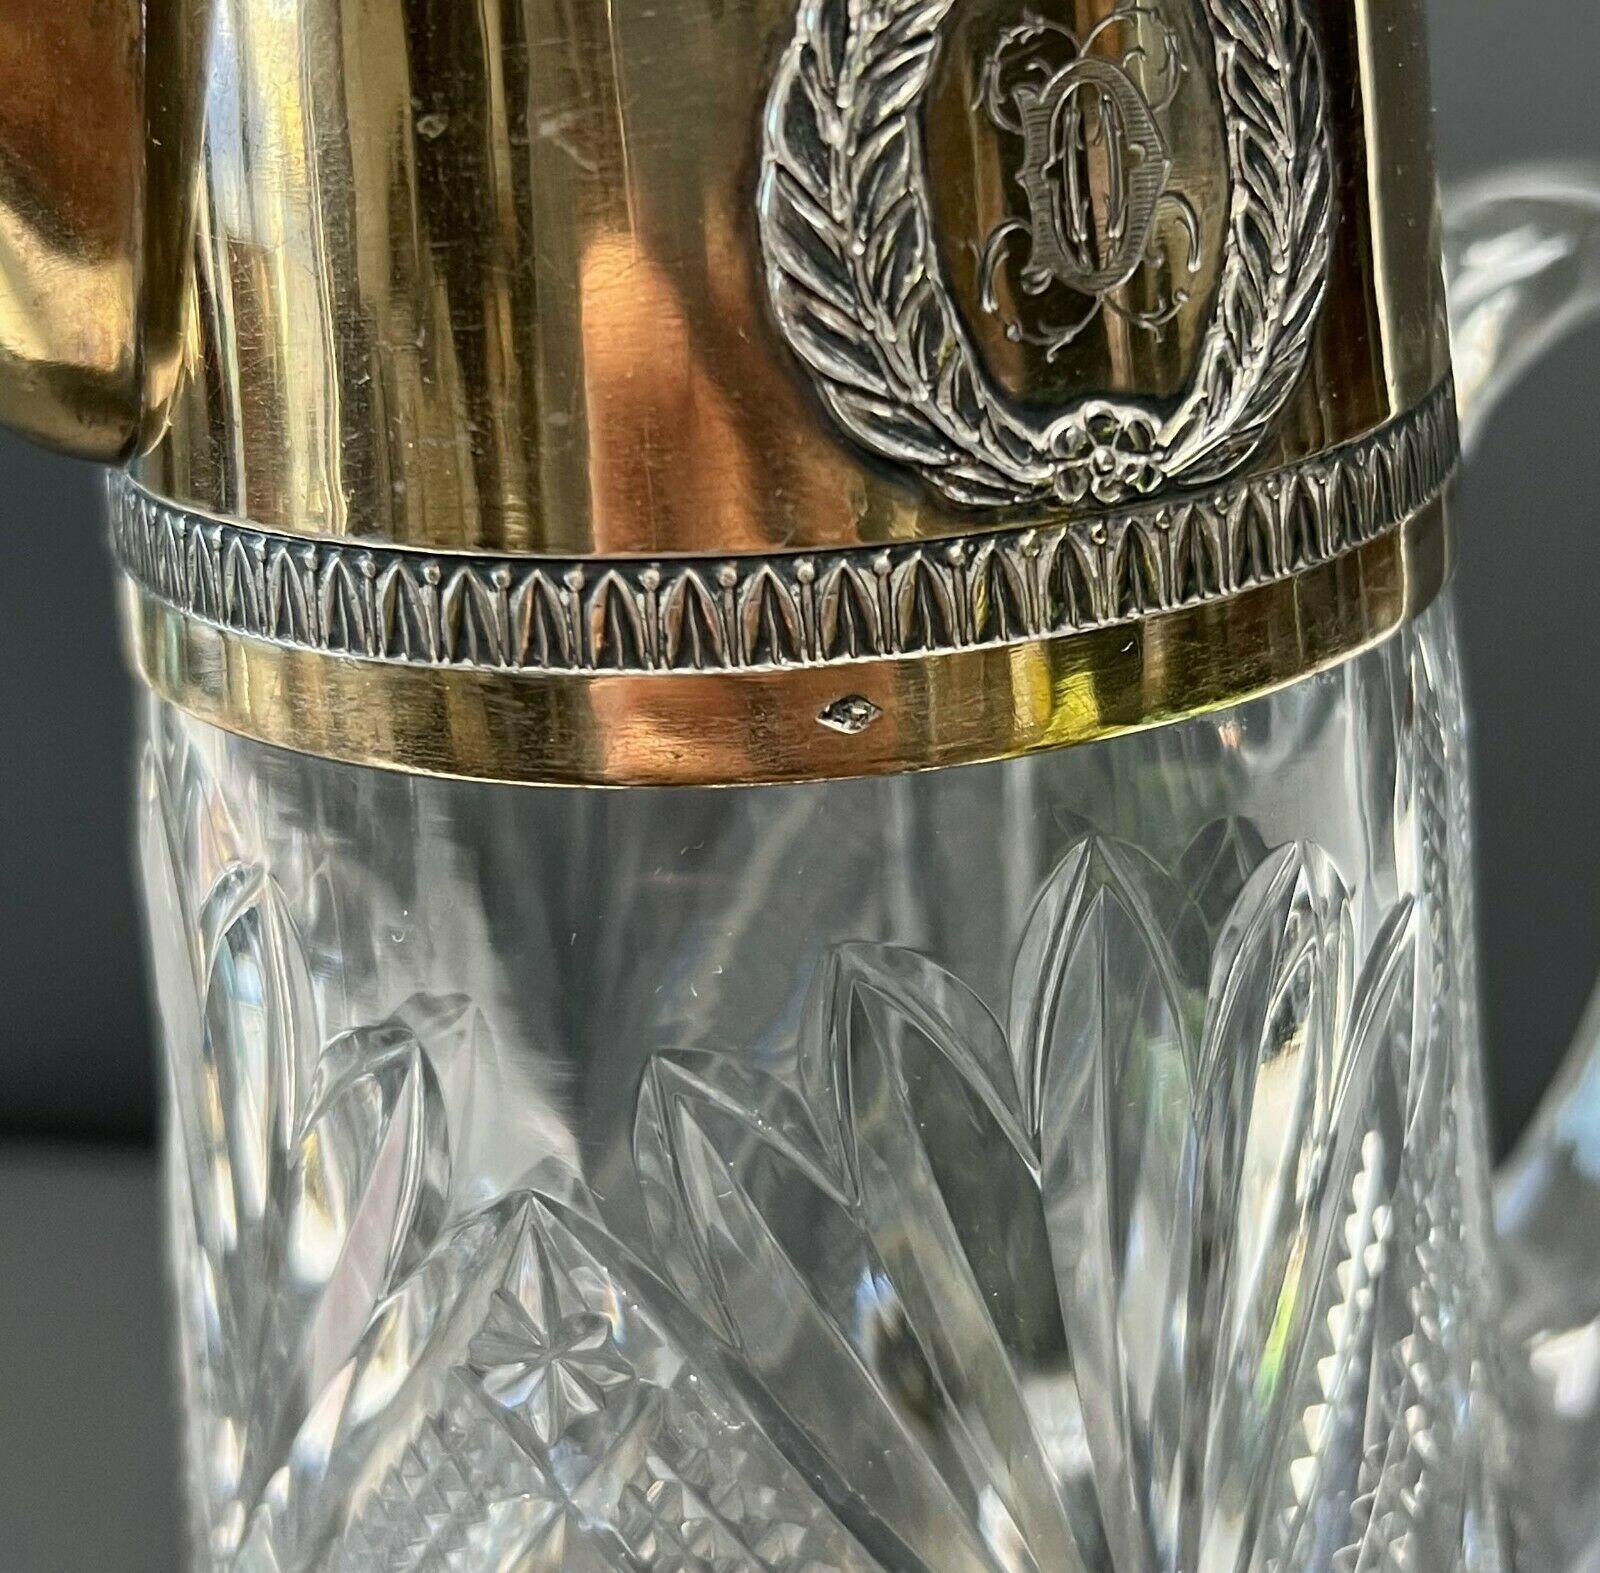 20th Century Auguste Leroy & Cie France Gilt 950 Silver Mounted Cut Glass Pitcher, circa 1920 For Sale